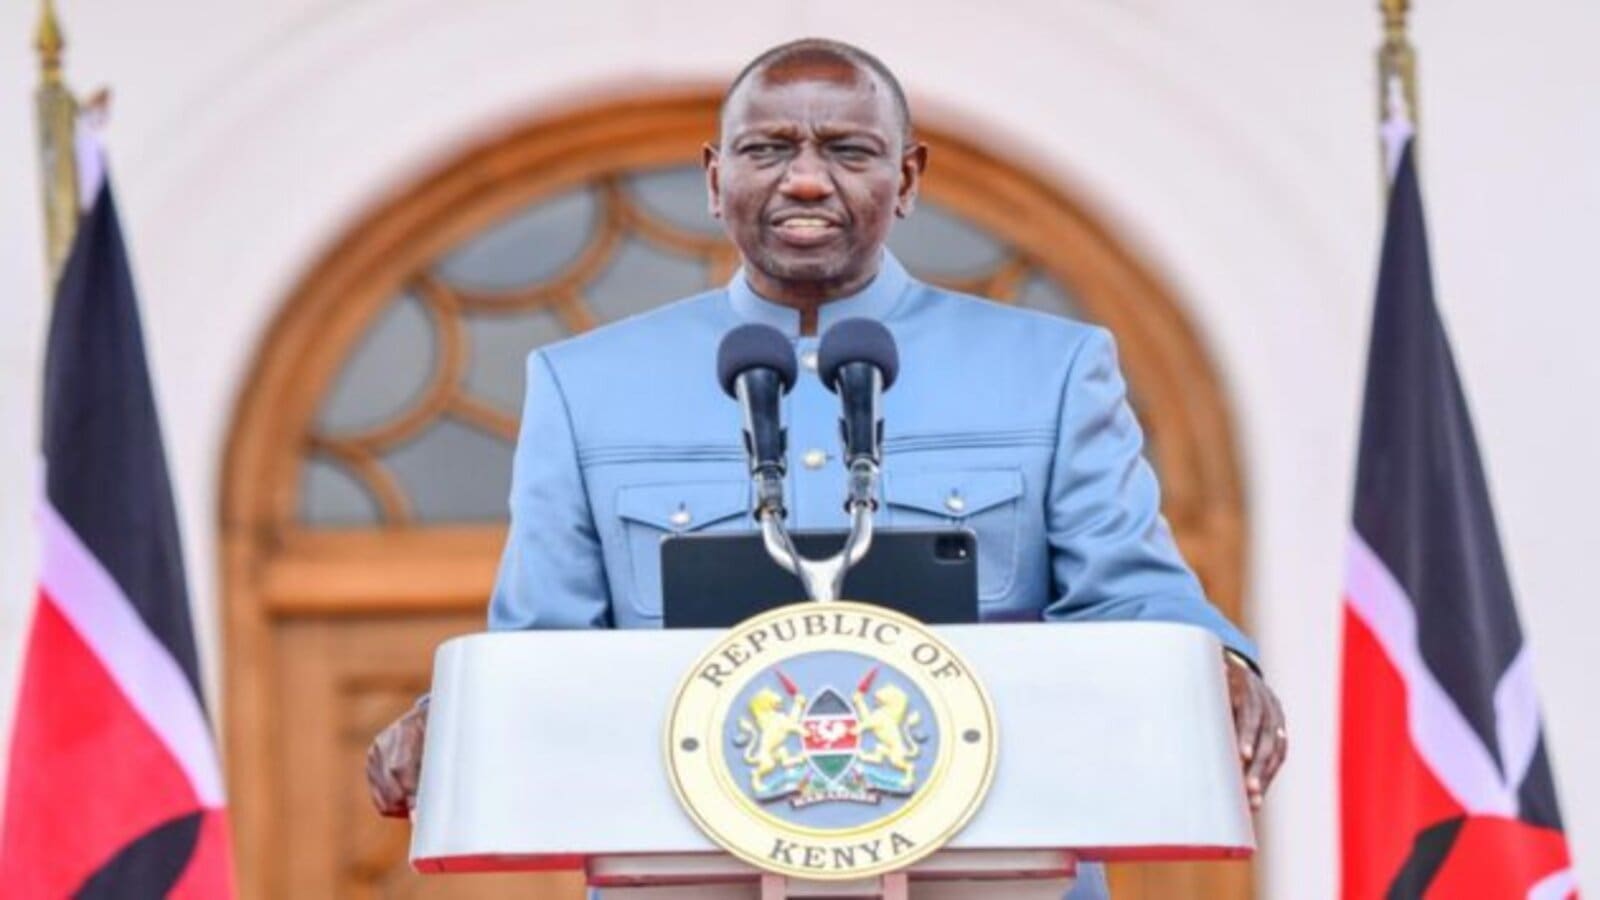 Kenya to implement Warehouse Receipt System, as Ruto slashes subsidized fertilizer prices by 29%